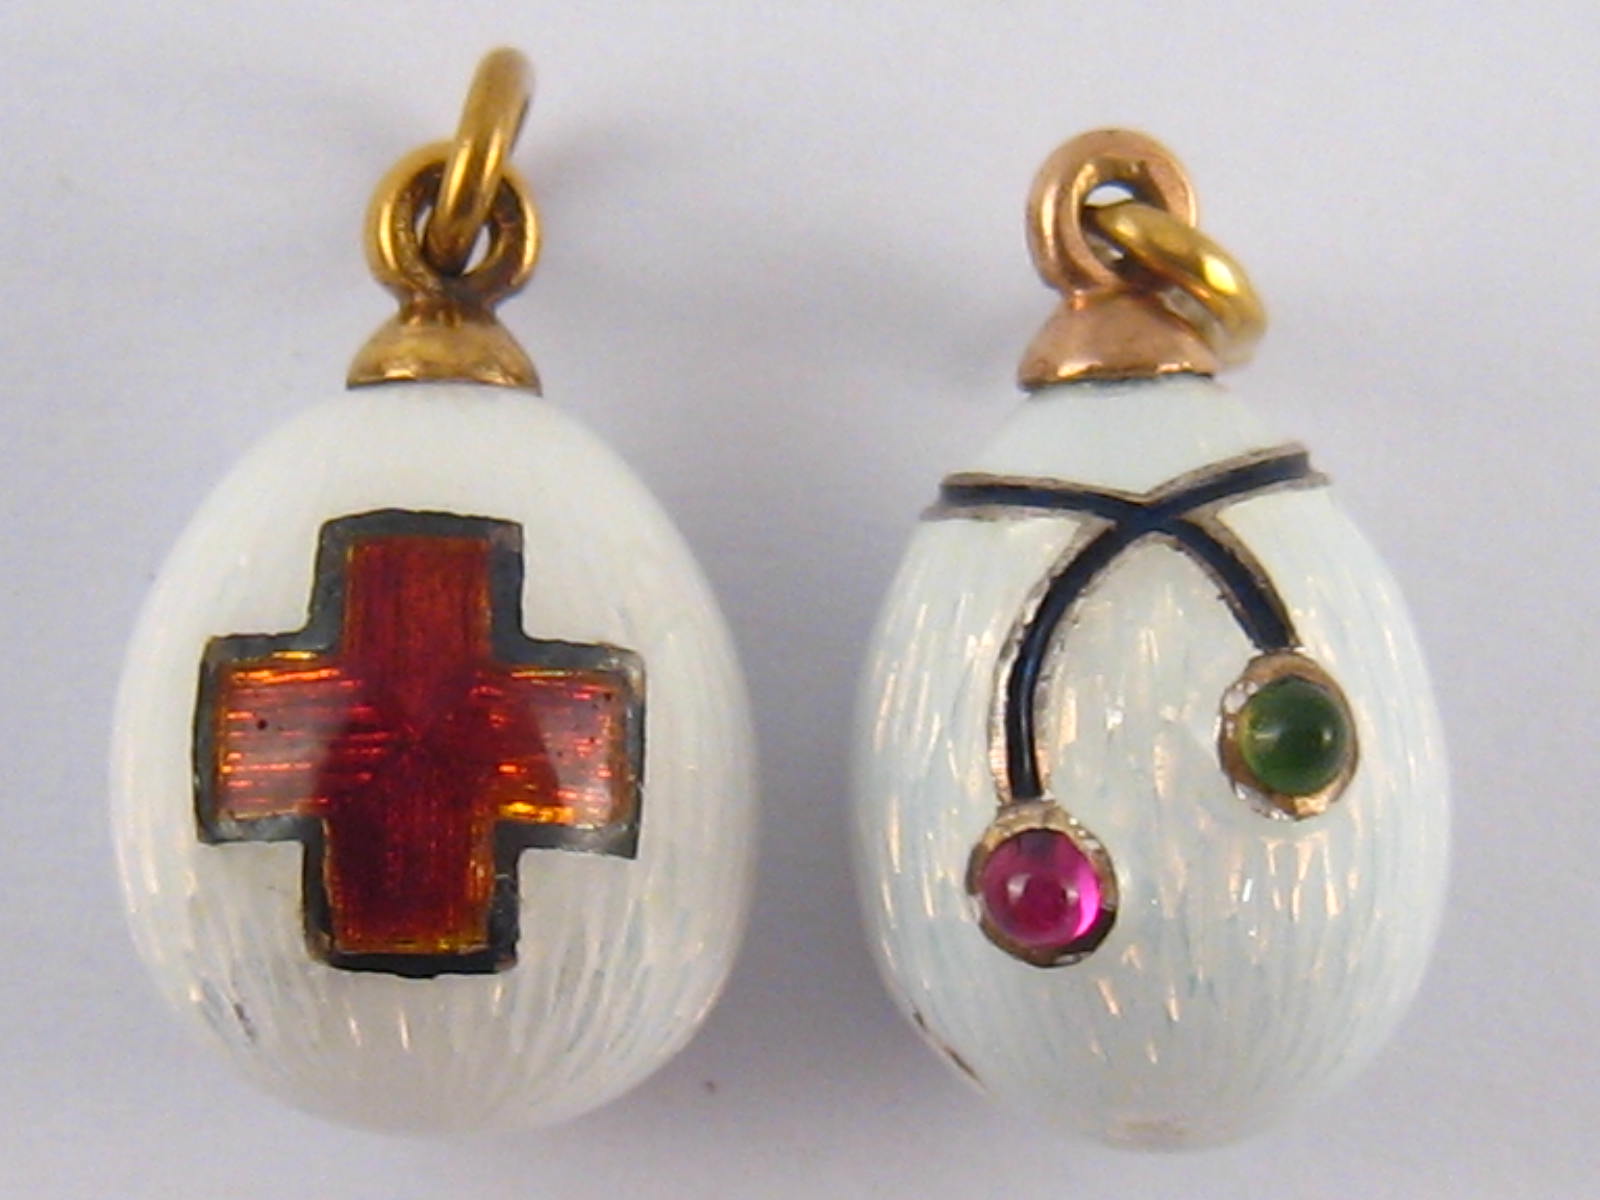 Two Russian guilloche enamelled eggs, one with Red Cross emblem, marked 56, approx 14 ct.